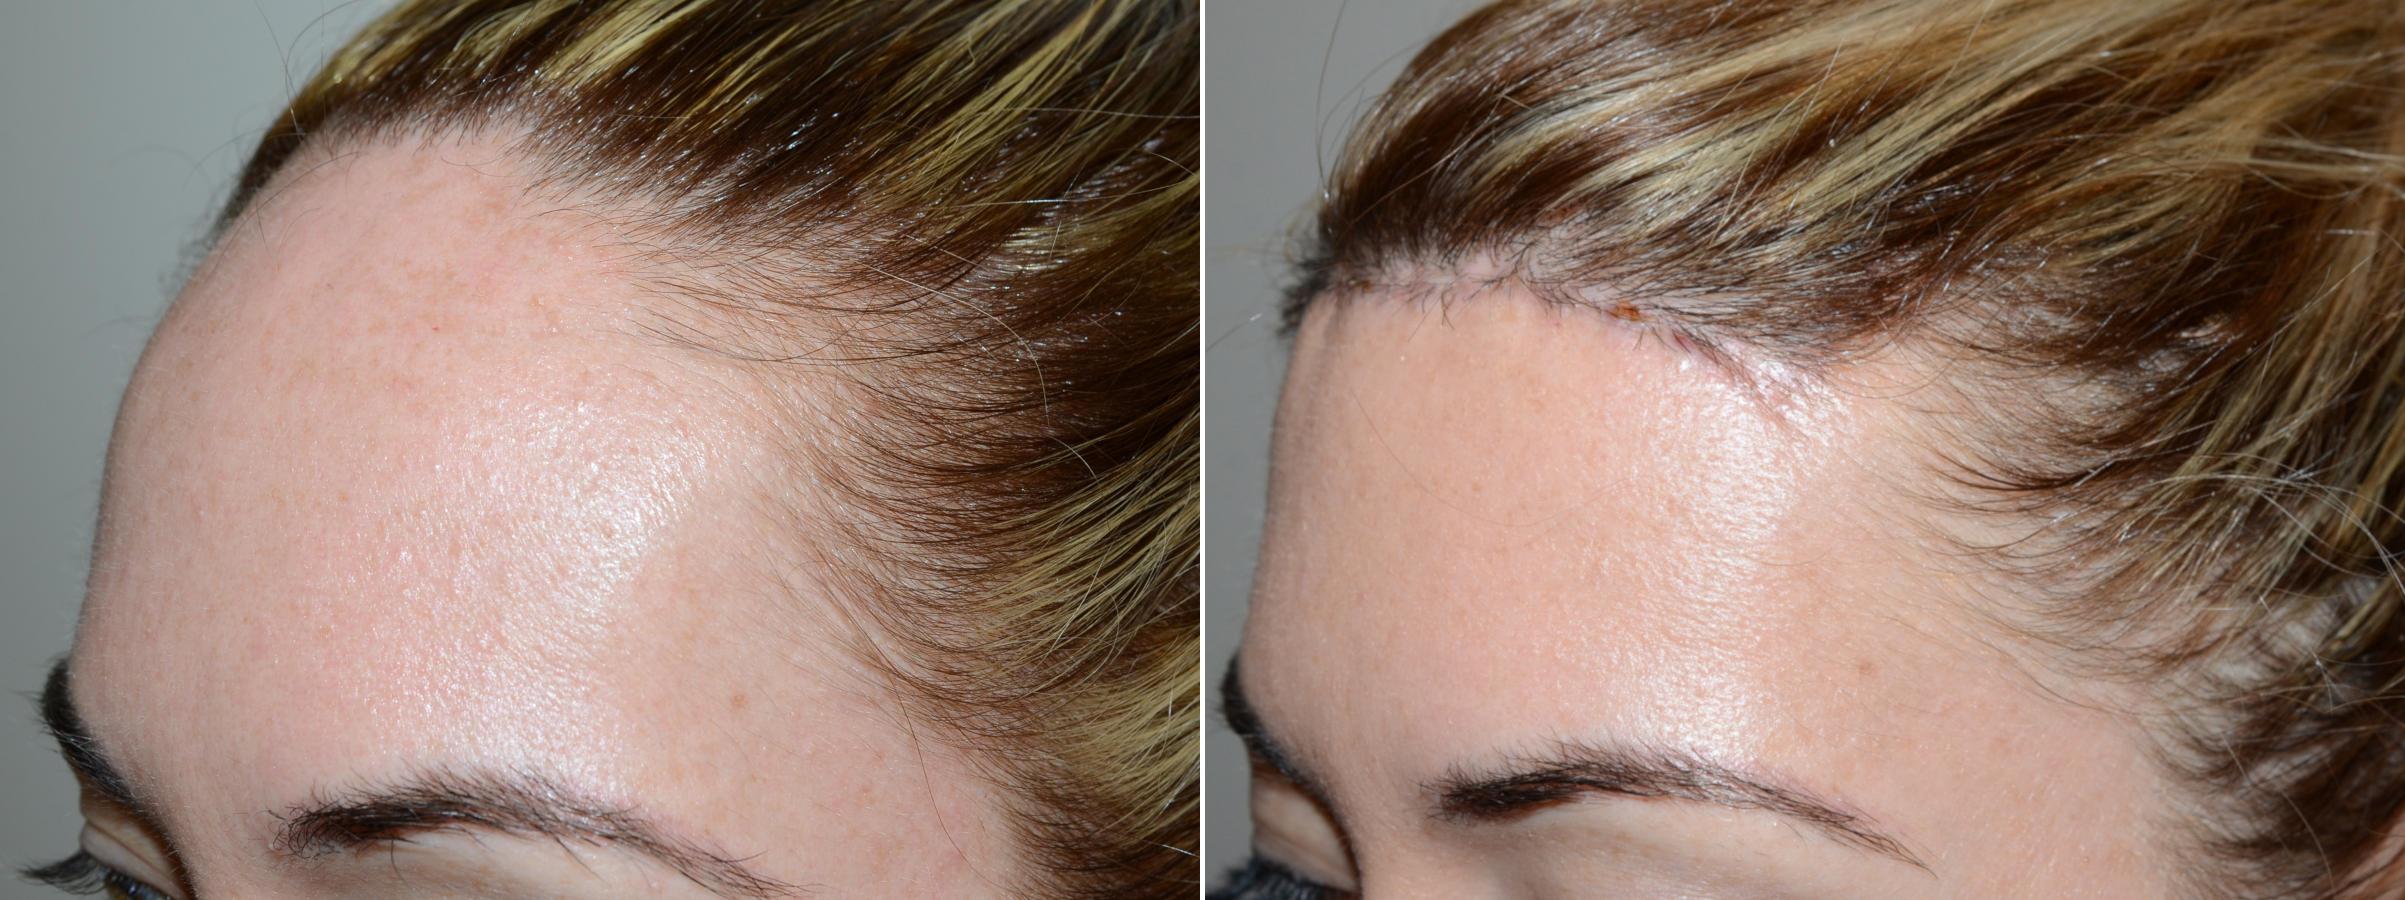 Forehead Reduction Surgery photos | Miami, FL | Patient58861